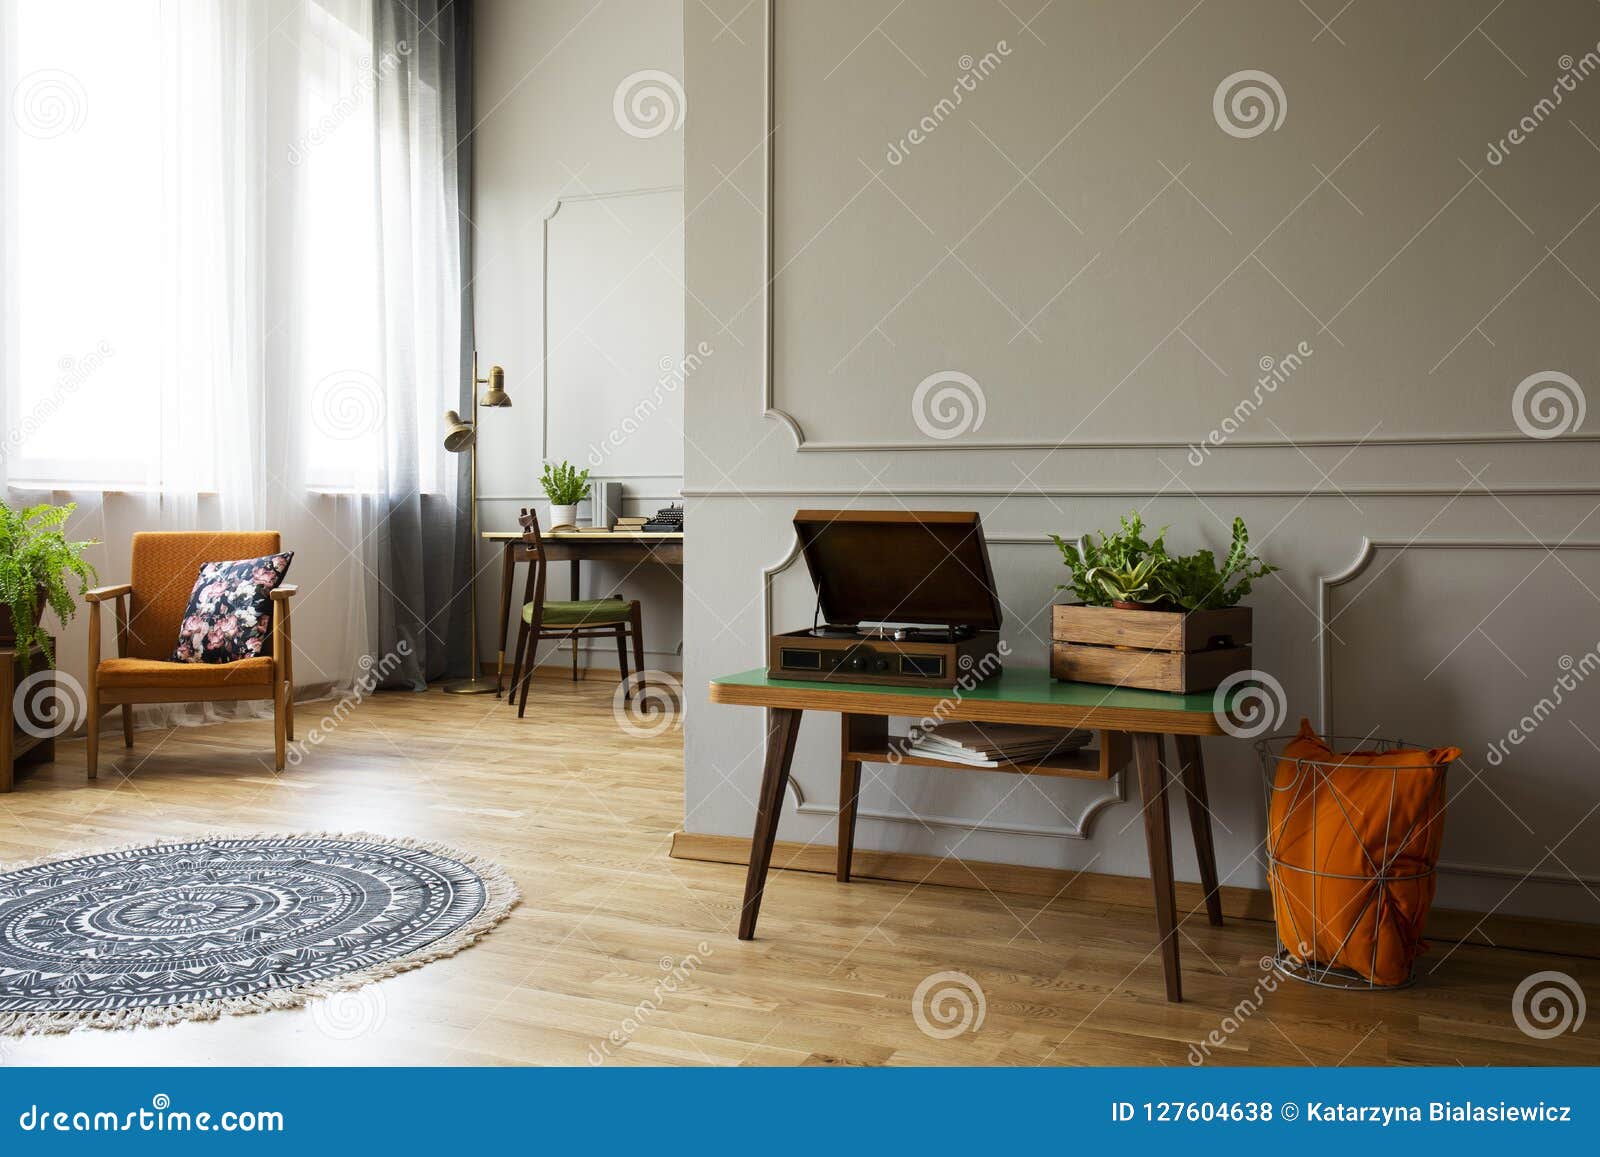 Record Player And Plant On Table In Vintage Living Room Interior